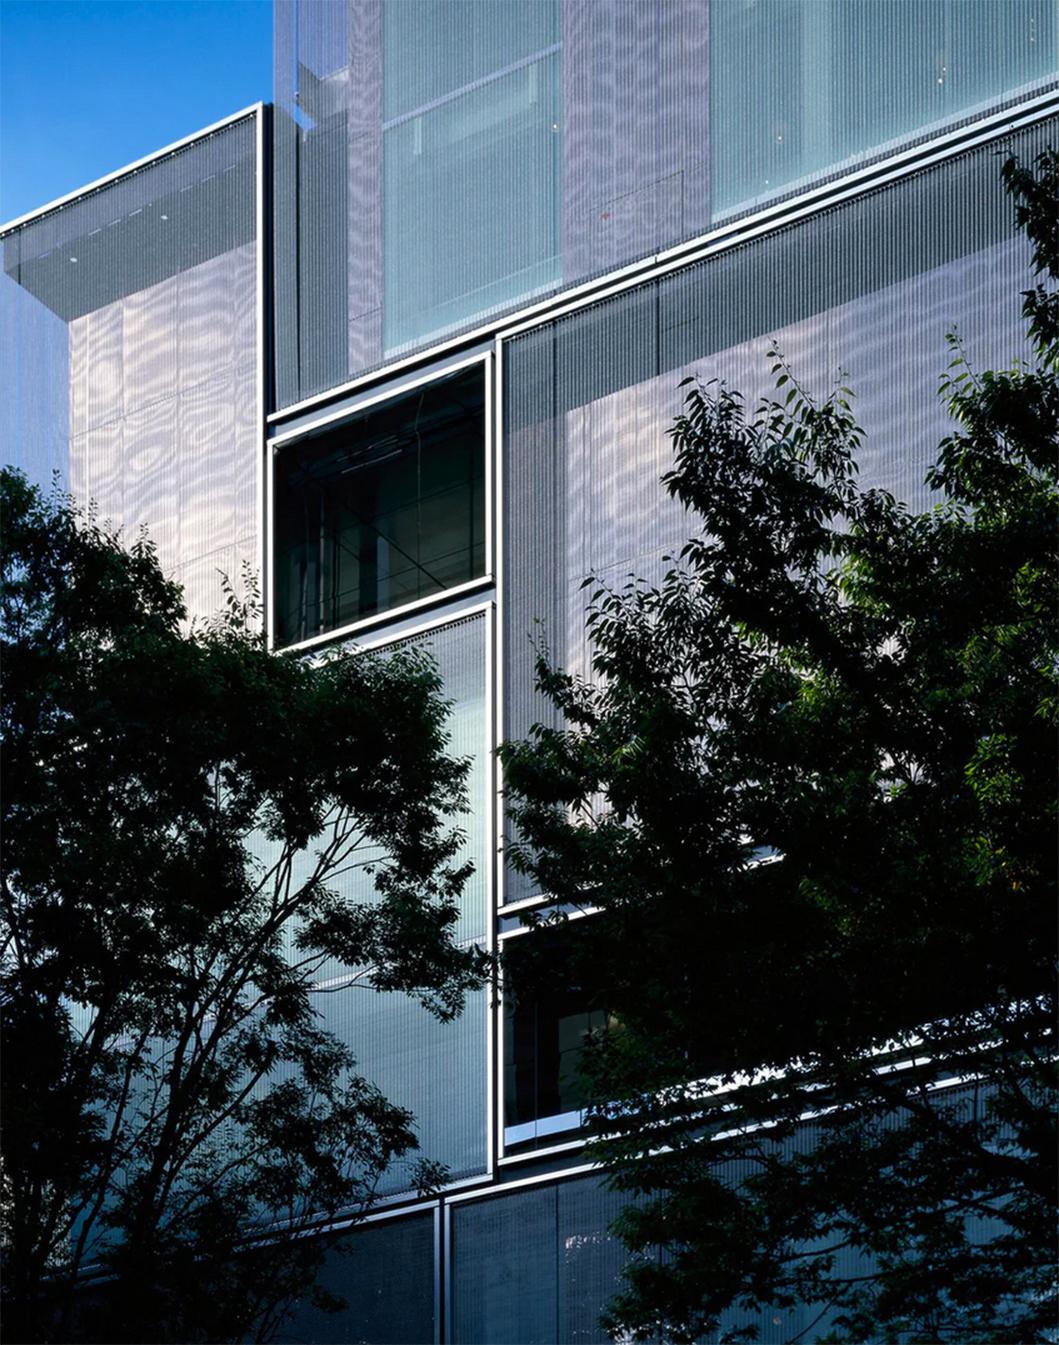 Louis Vuitton Beijing China Architectural Glass Design for